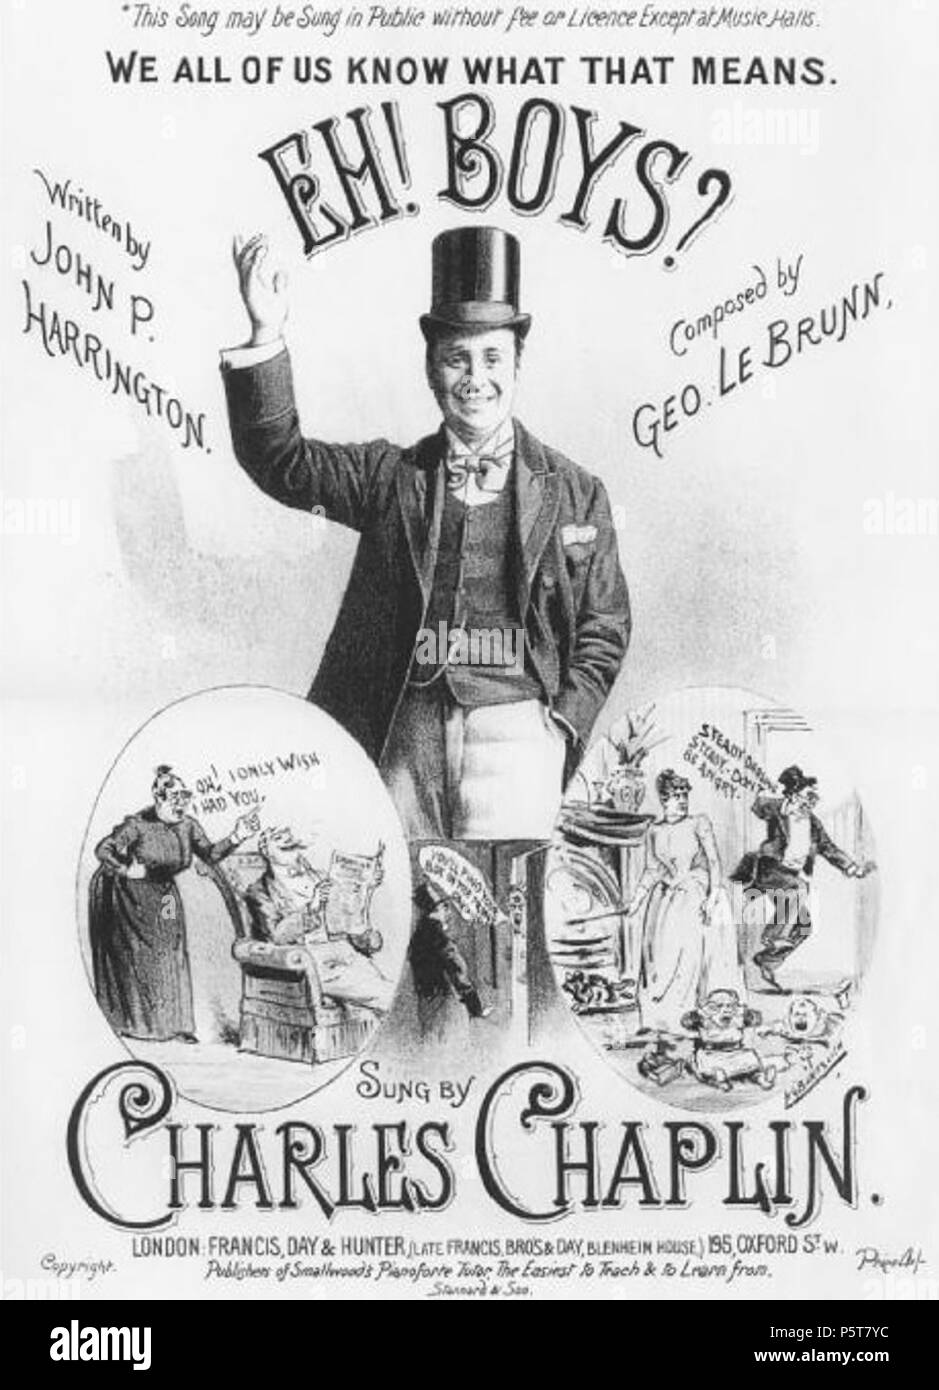 N/A. Sheet music cover for Eh! Boys This Song may be Sung in Public without fee or Licence Except at Music Halls. We all of us know what that means. Eh! Boys Written by John P. Harrington. Composed by Geo Le Brunn. Sung by Charles Chaplin. circa 1890. Unknown 325 Charles Chaplin sheet music cover Eh! Boys Stock Photo